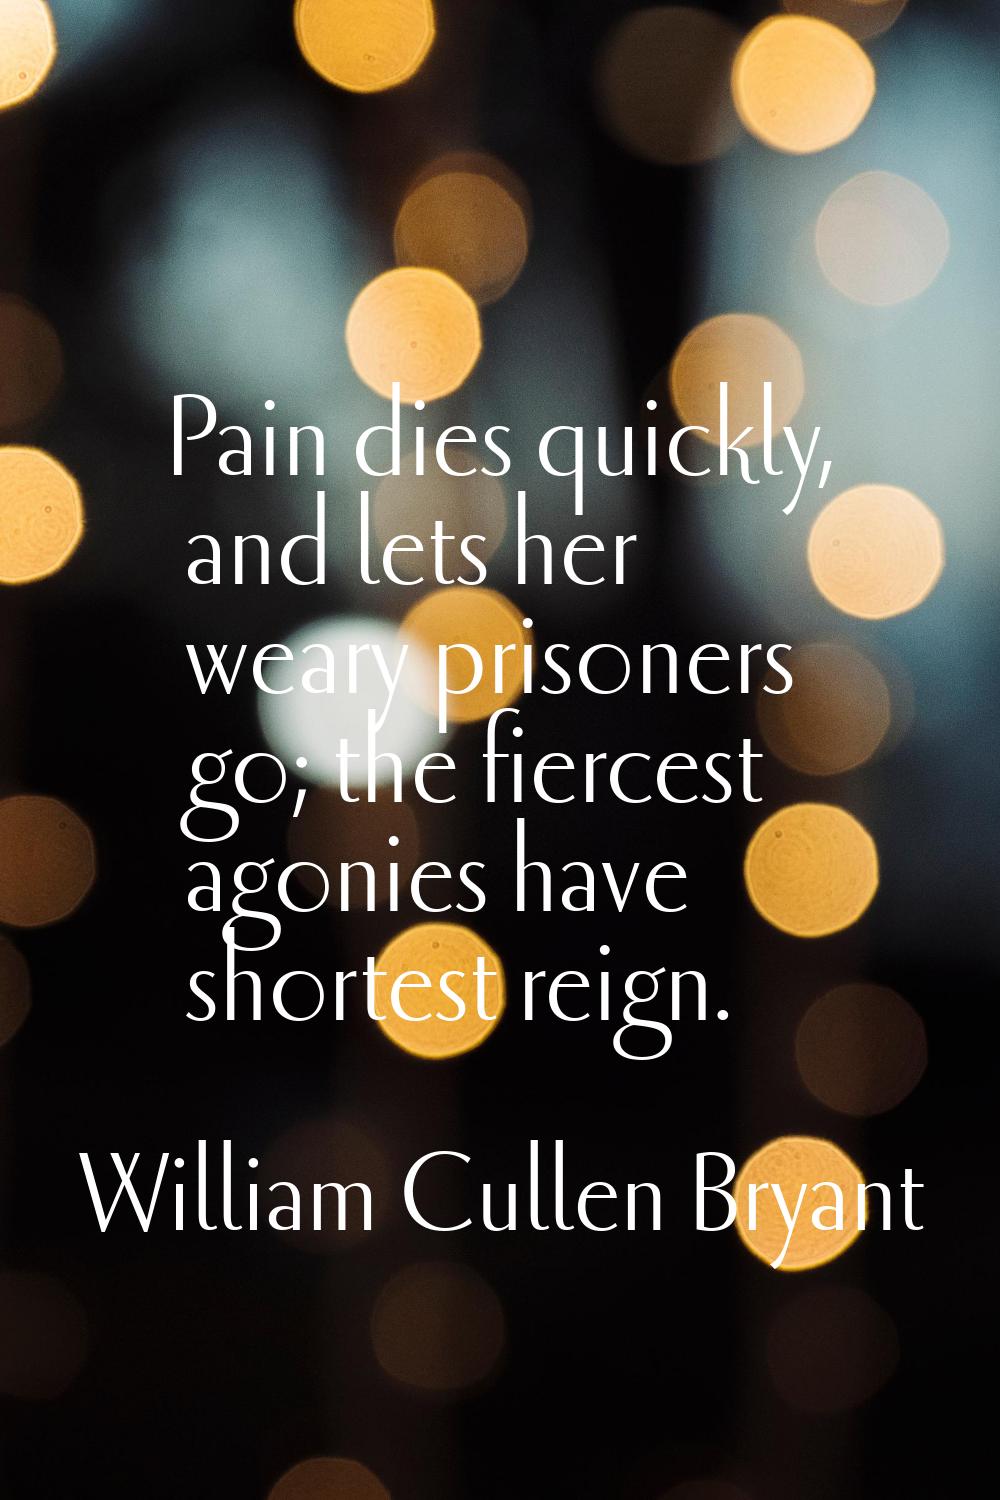 Pain dies quickly, and lets her weary prisoners go; the fiercest agonies have shortest reign.